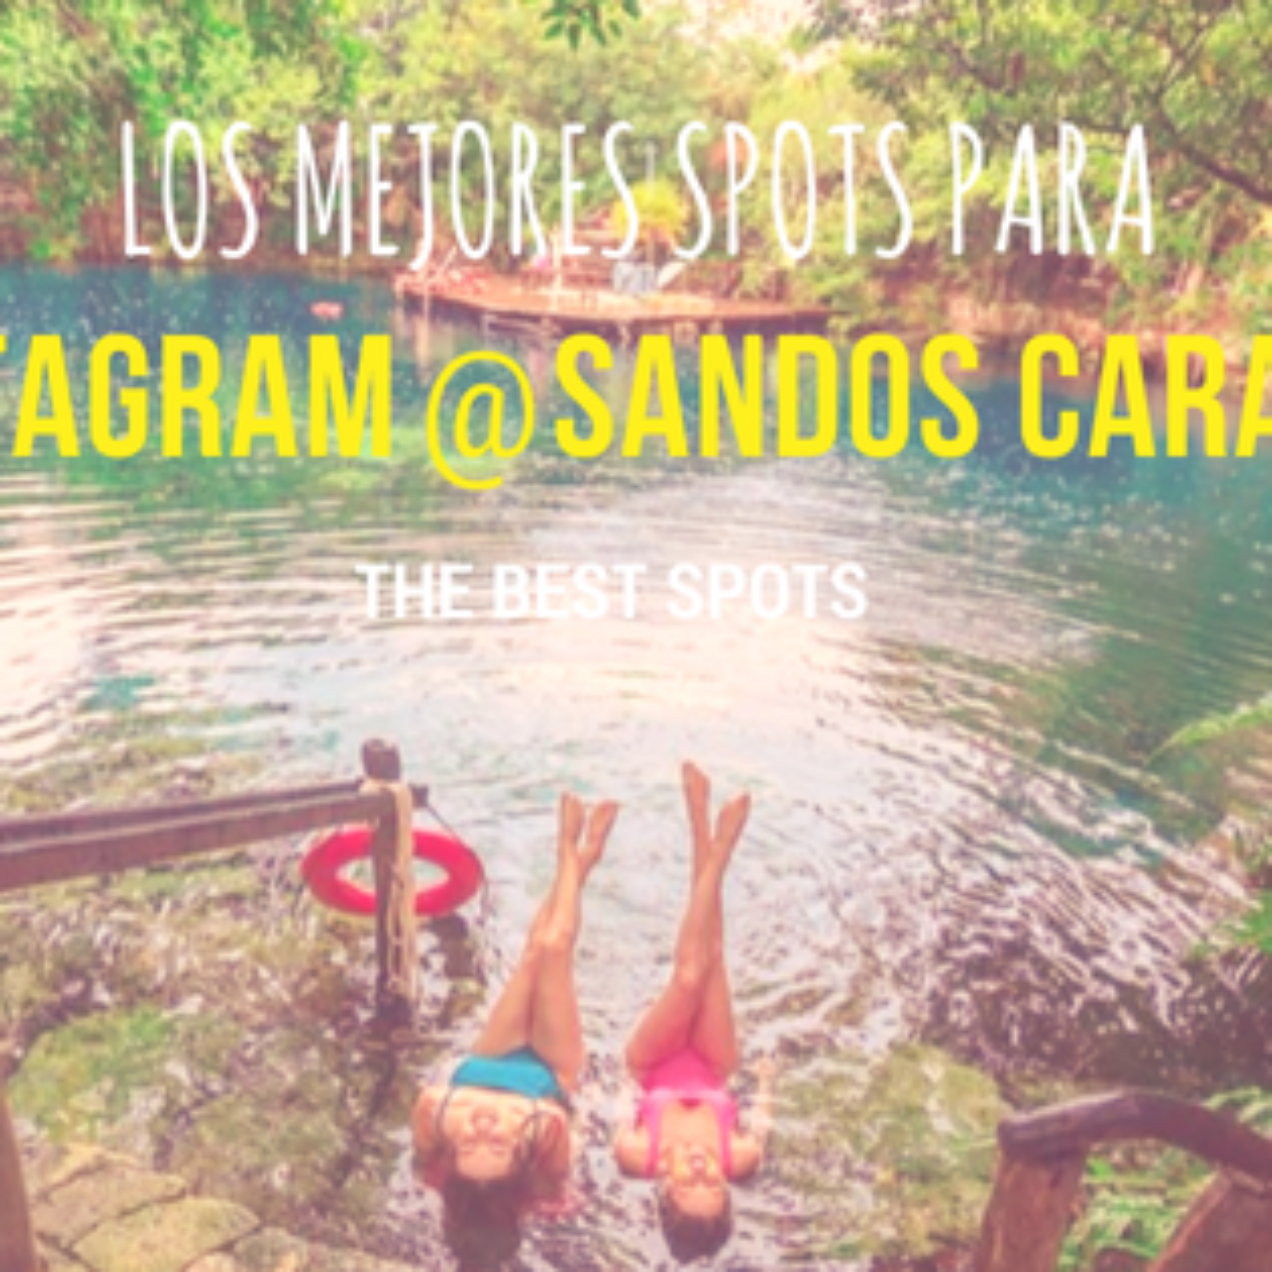 The Best Spots for Instagram at Sandos Caracol